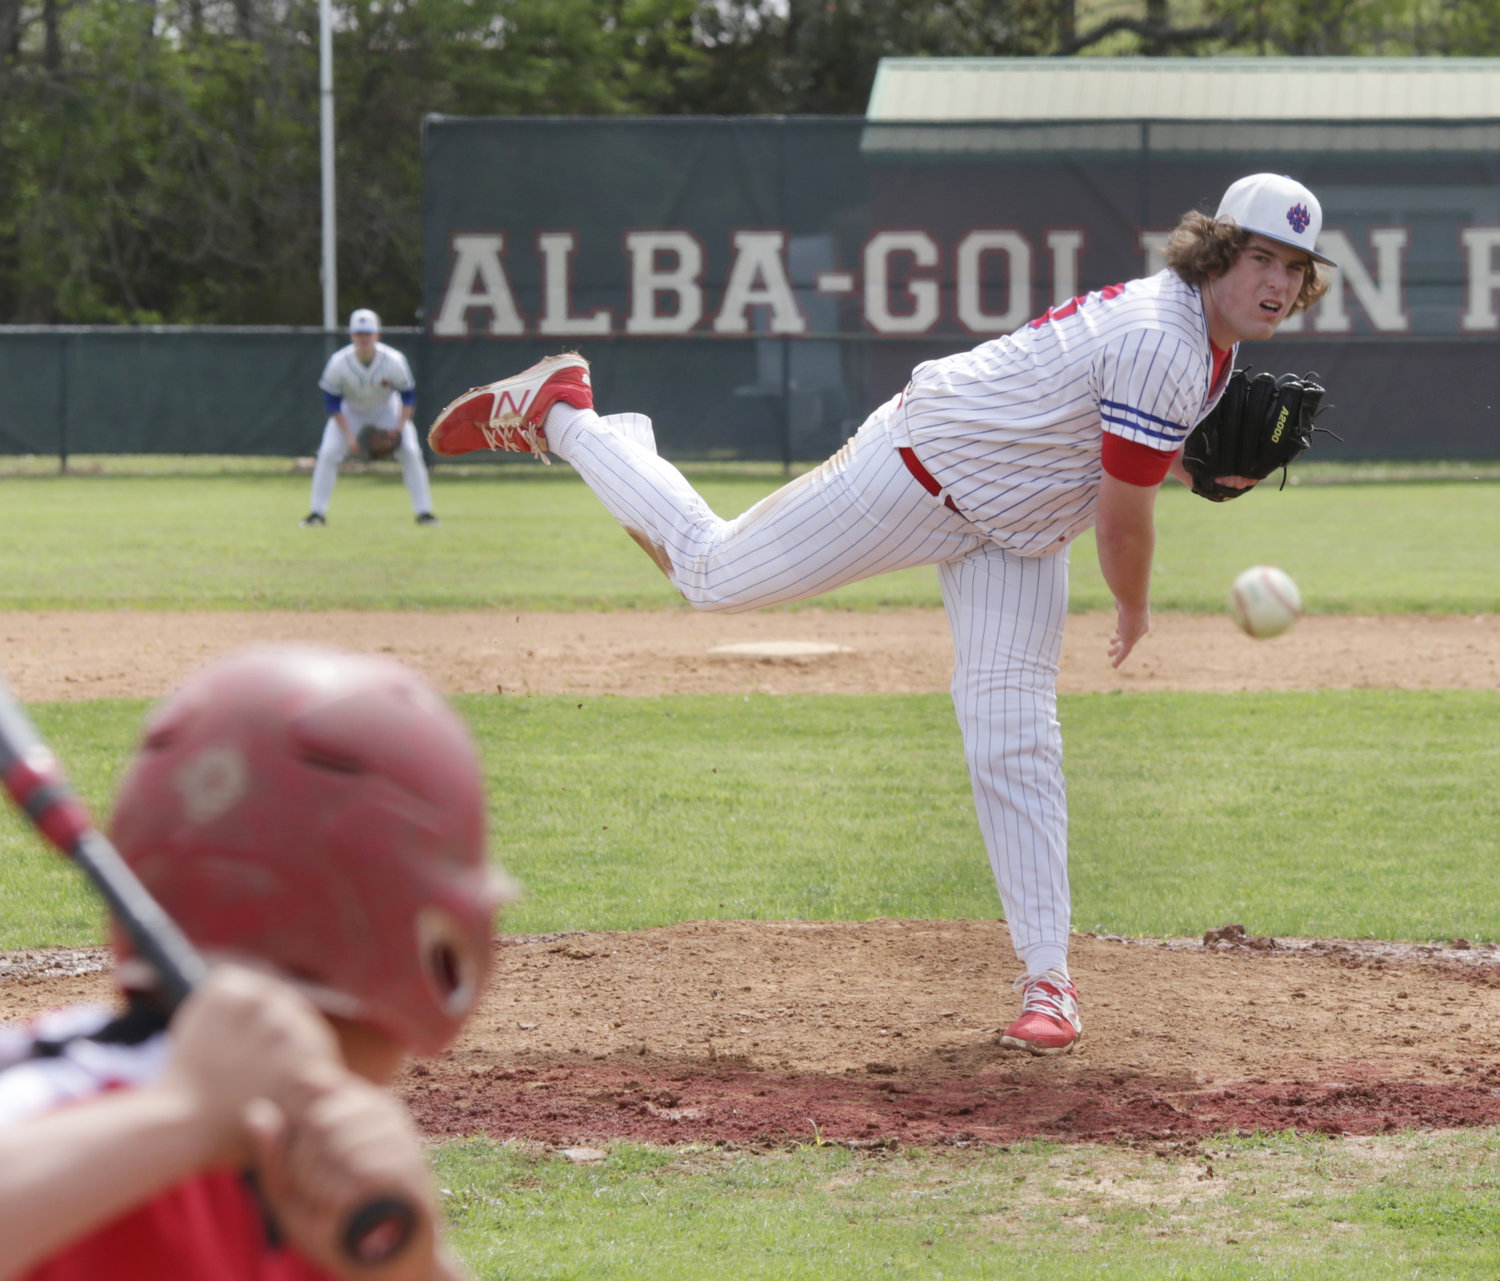 Conner Gibson had an excellent start in Alba-Golden’s 13-2 win over North Hopkins.